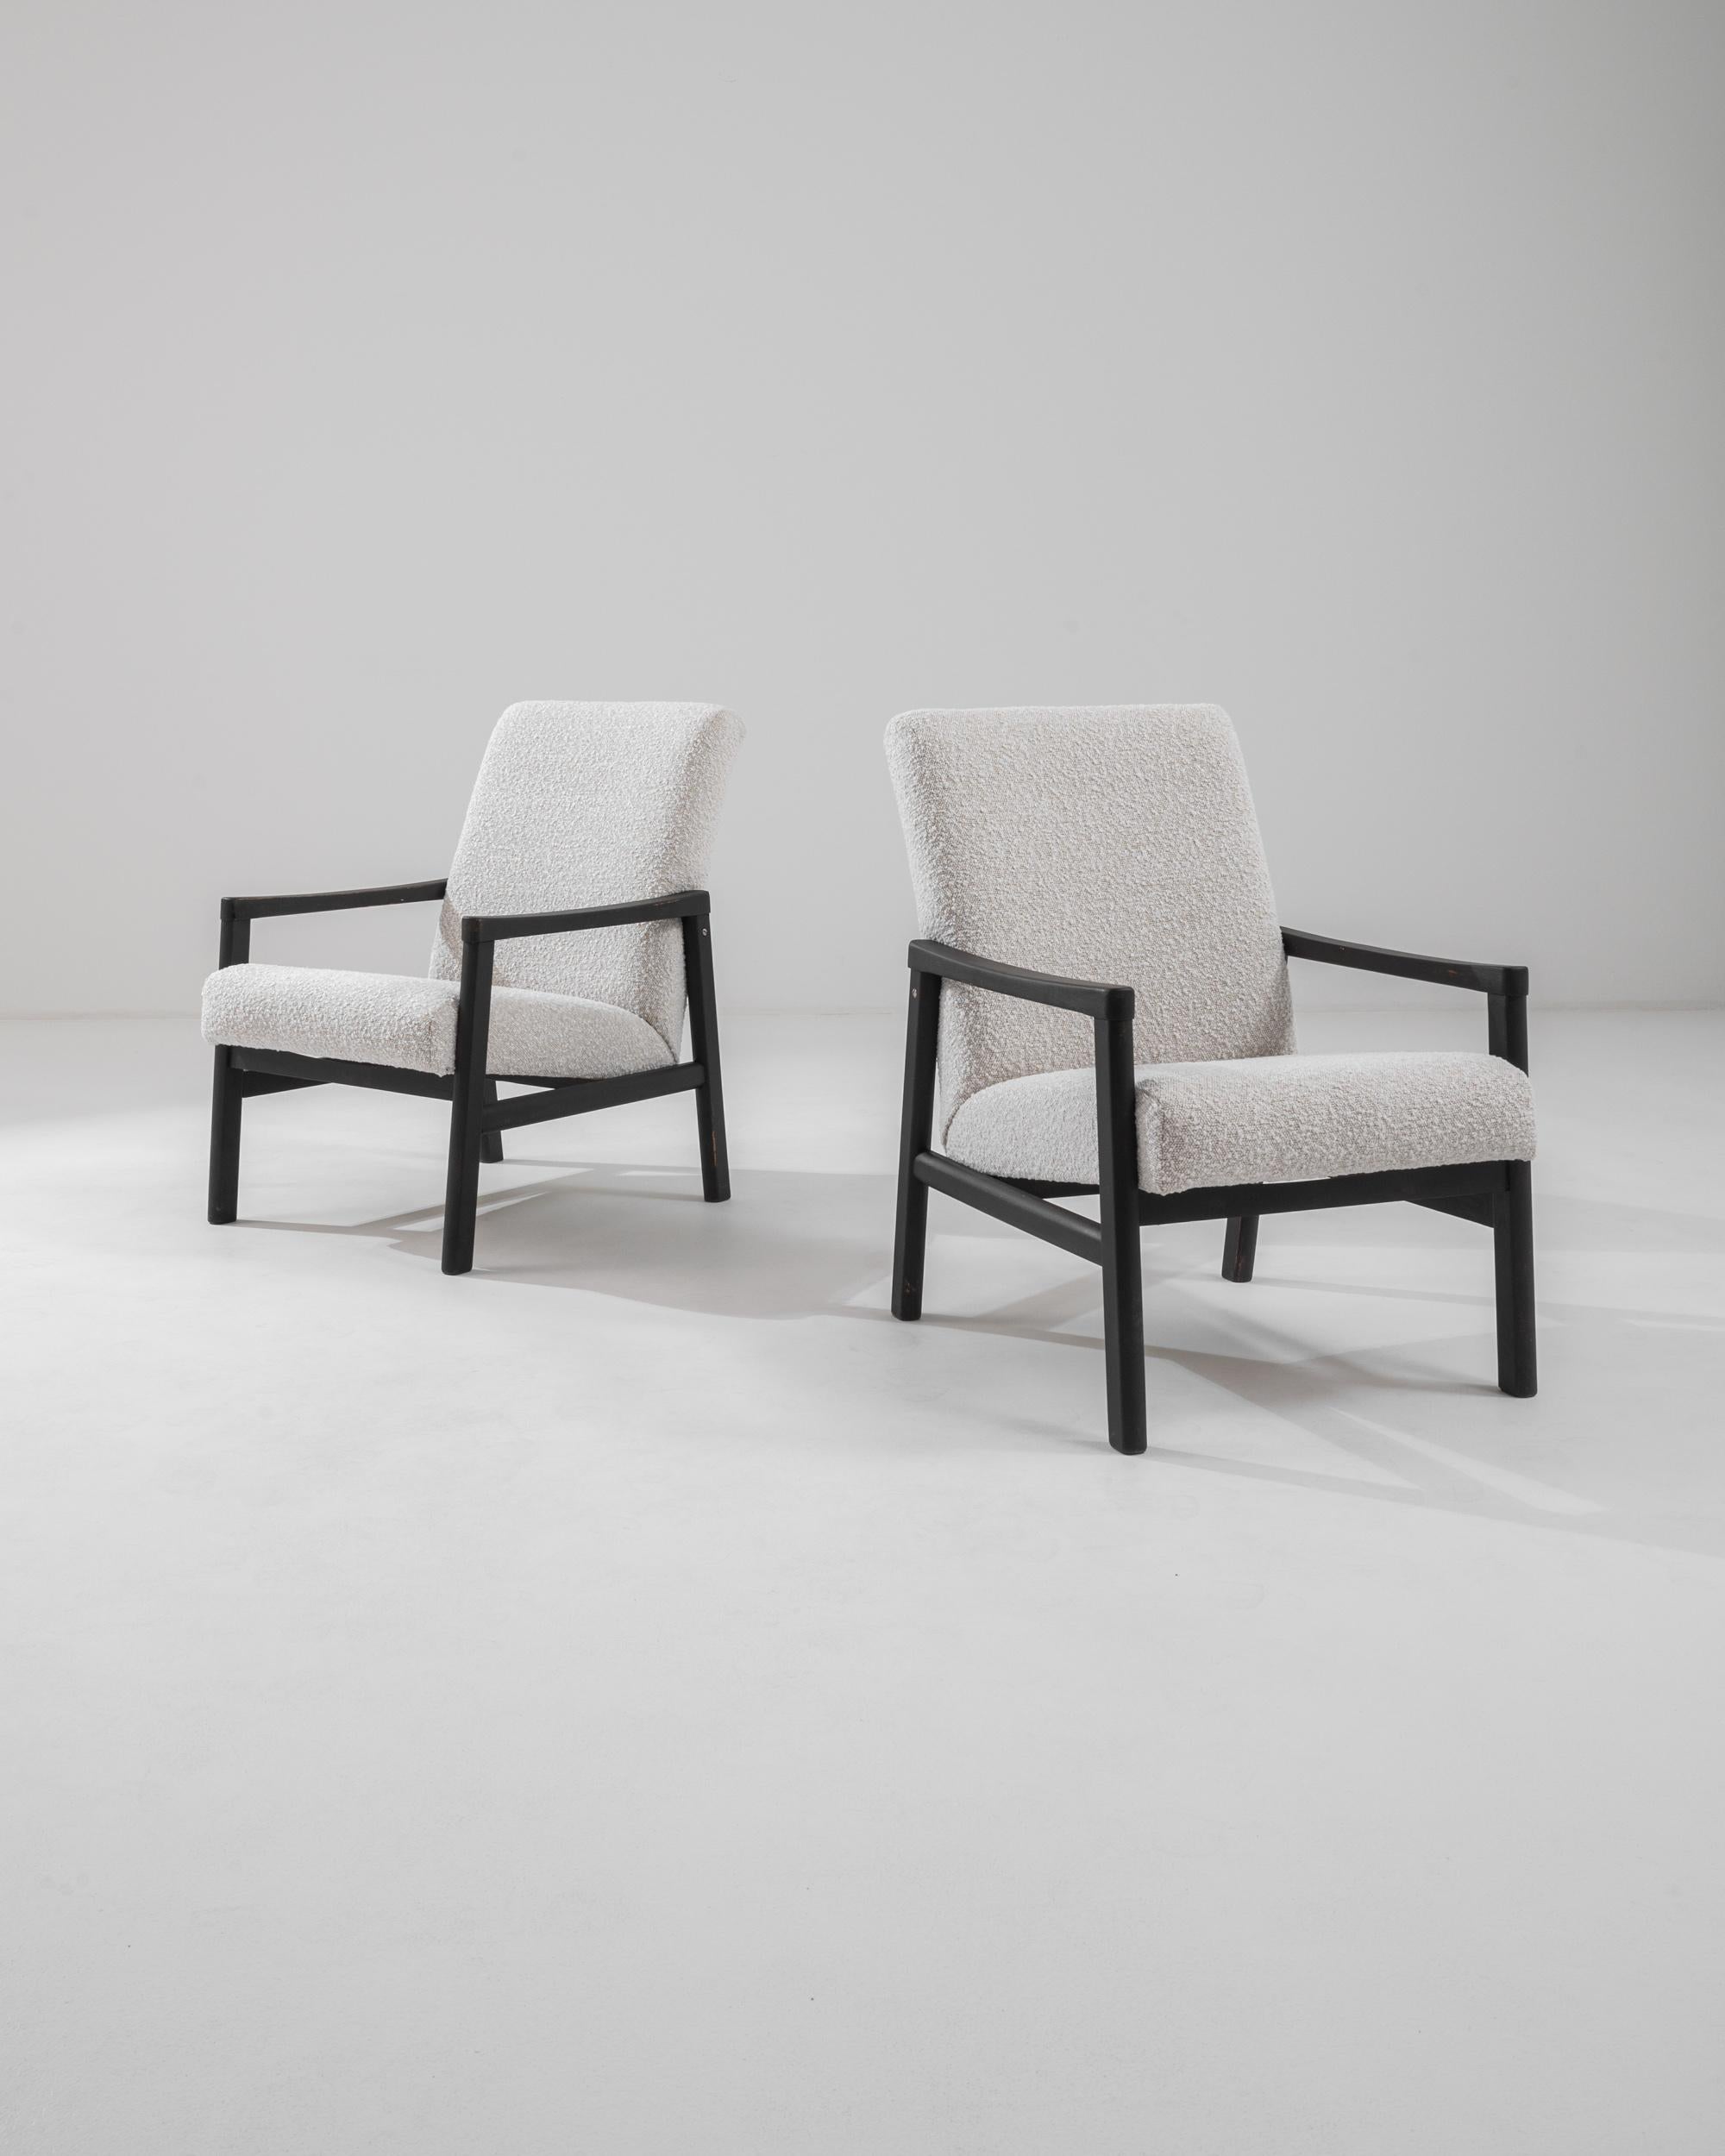 Immerse yourself in the retro allure of our 1960s Czech Pair of Upholstered Armchairs, a duo that beautifully embodies the spirit of mid-century design. These chairs feature a robust frame with sleek black lines that form a striking contrast against